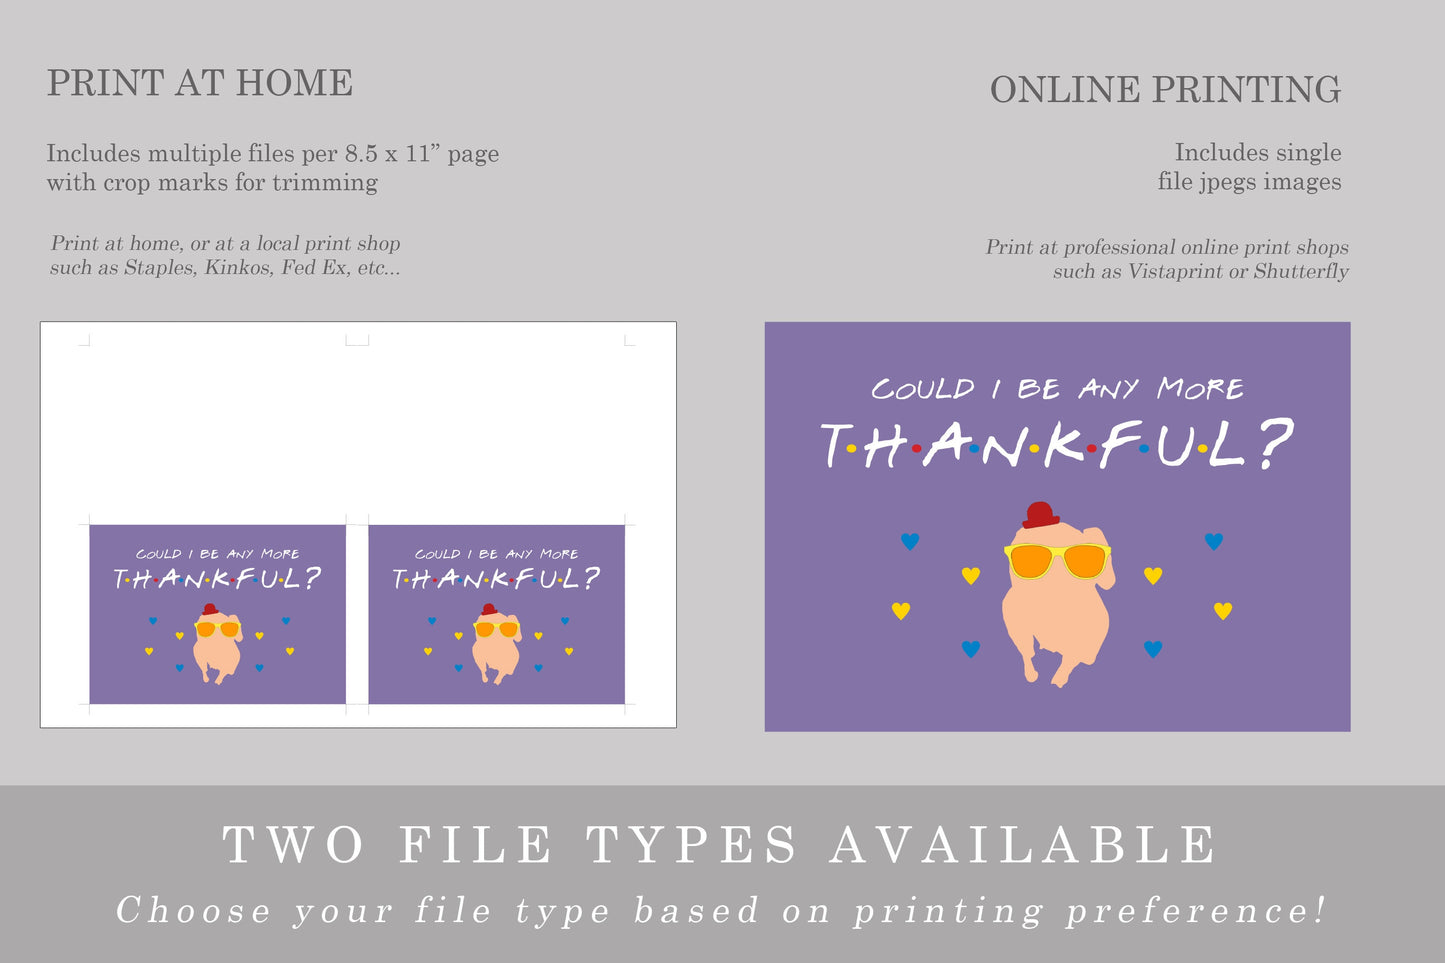 Friends Thank You Card Printable